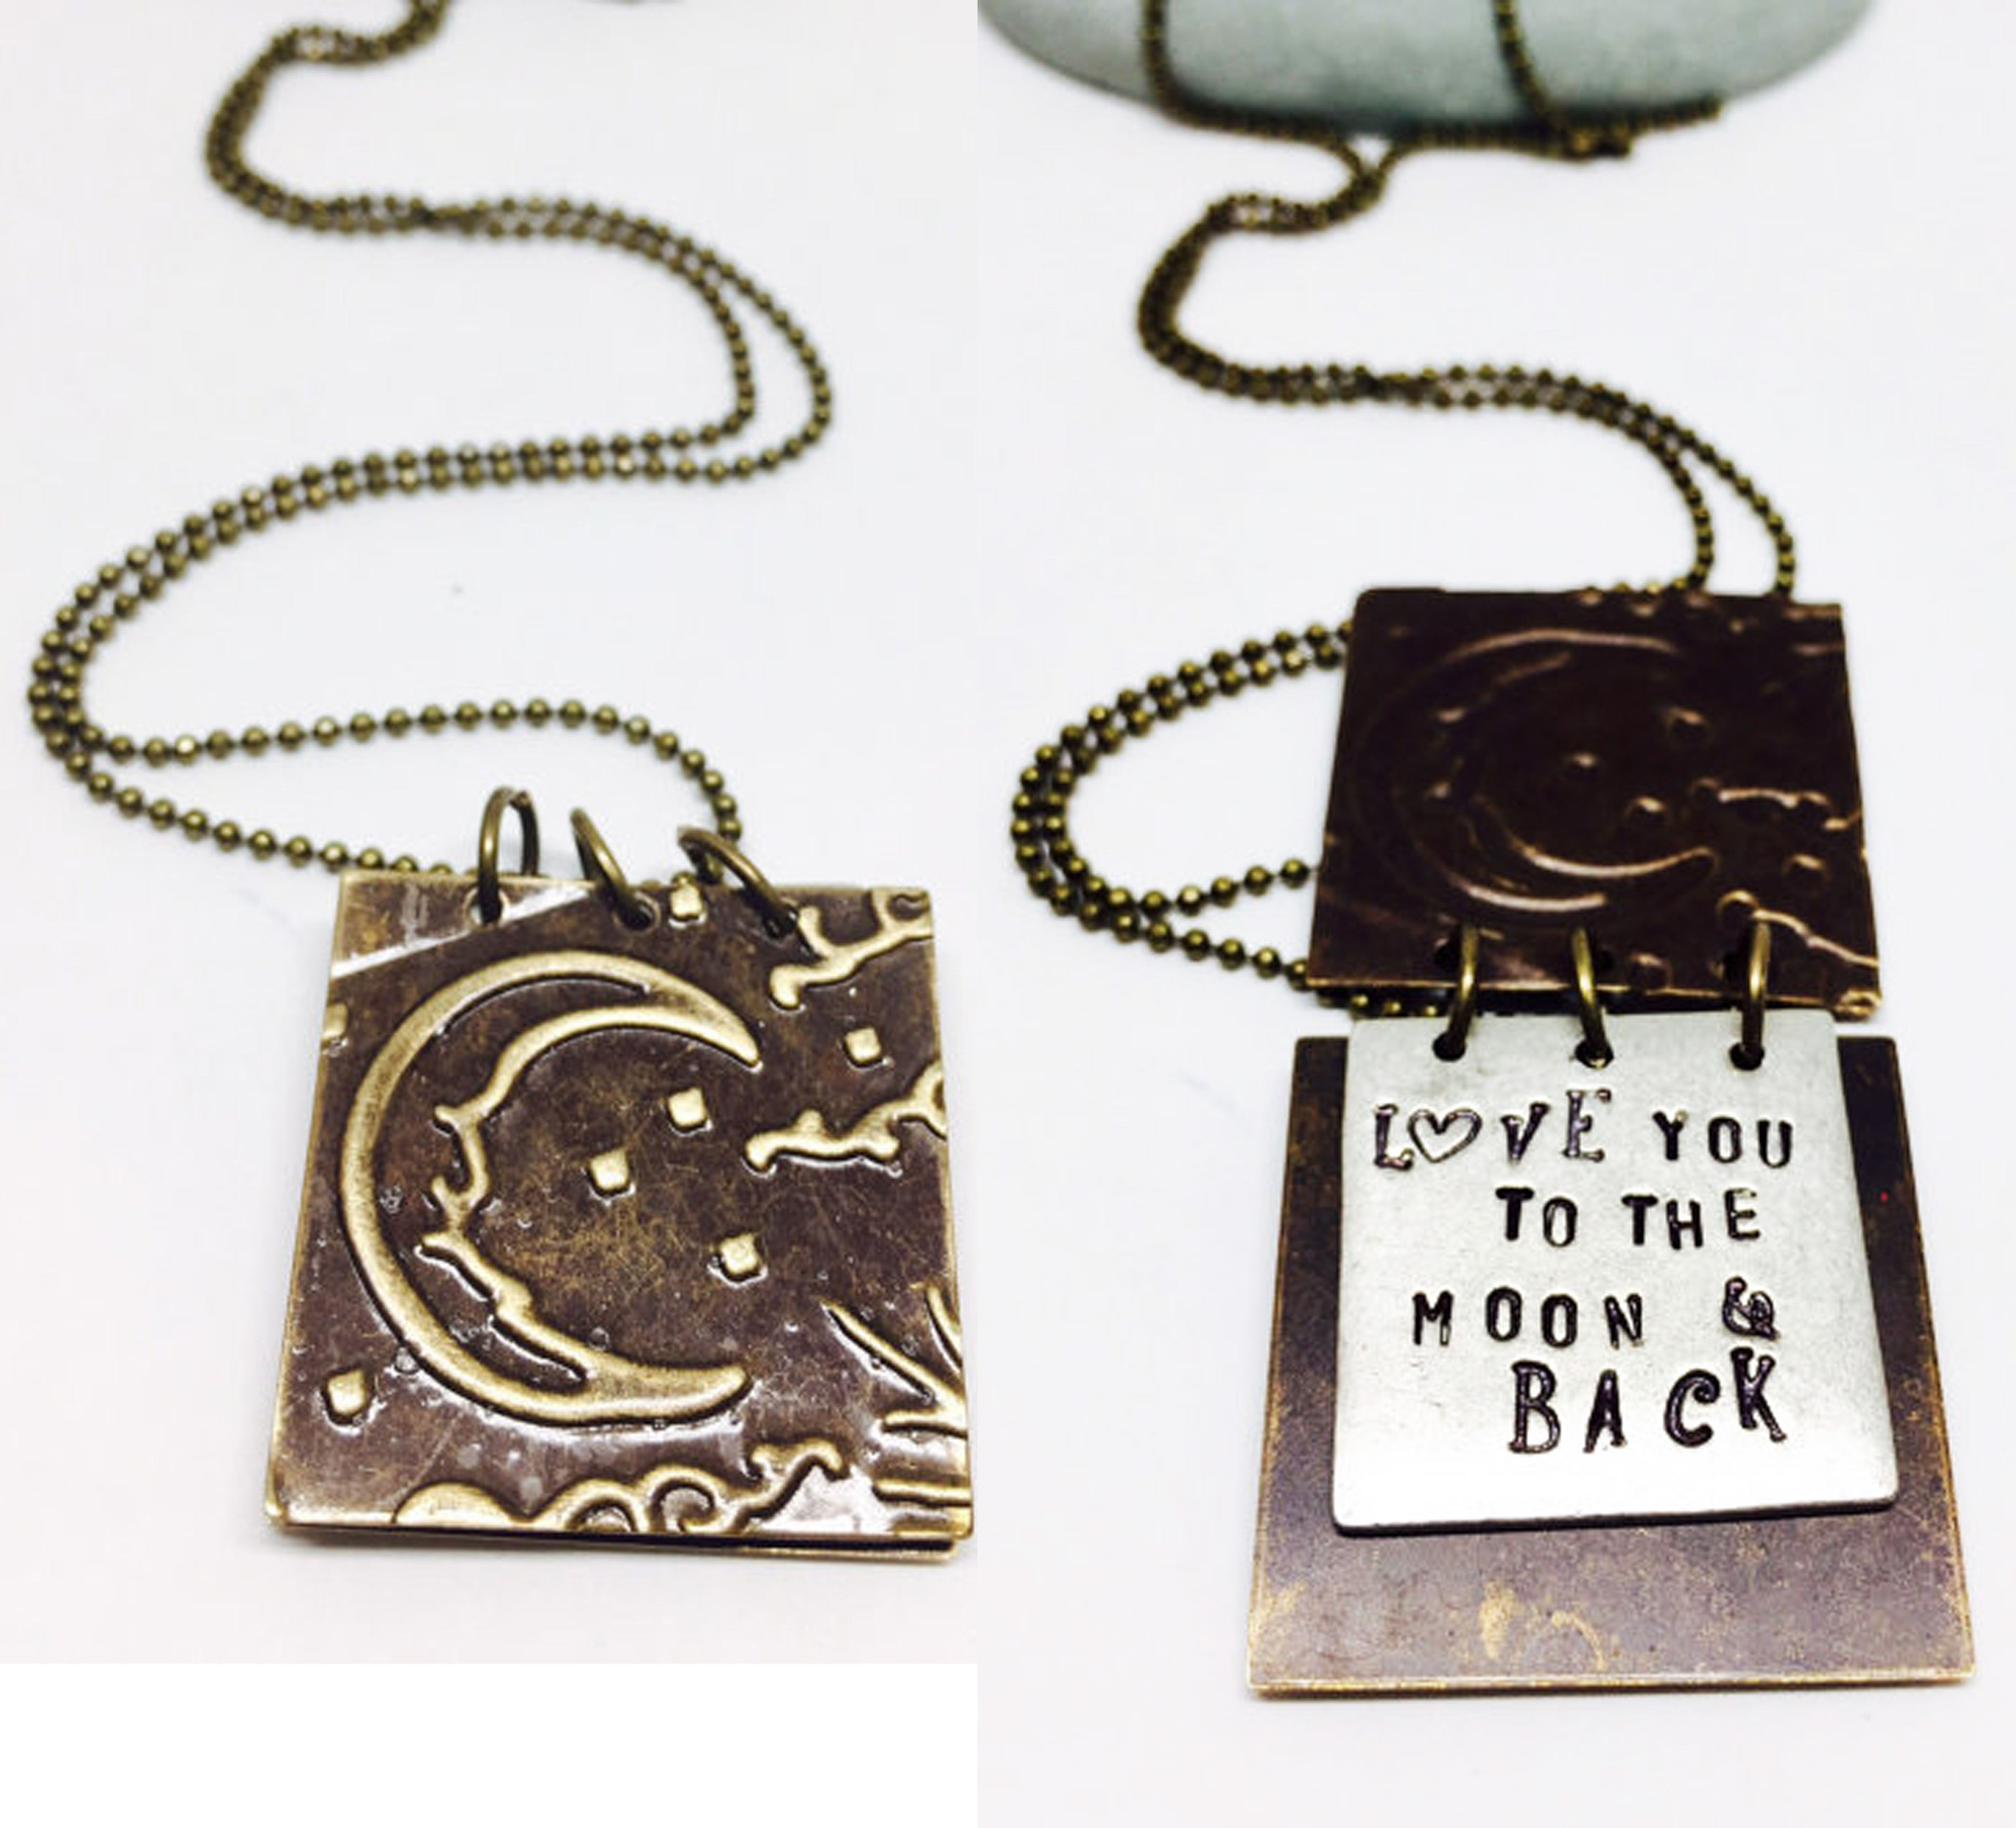 I Love You to the Moon & Back Pendant | Harry Ritchie's